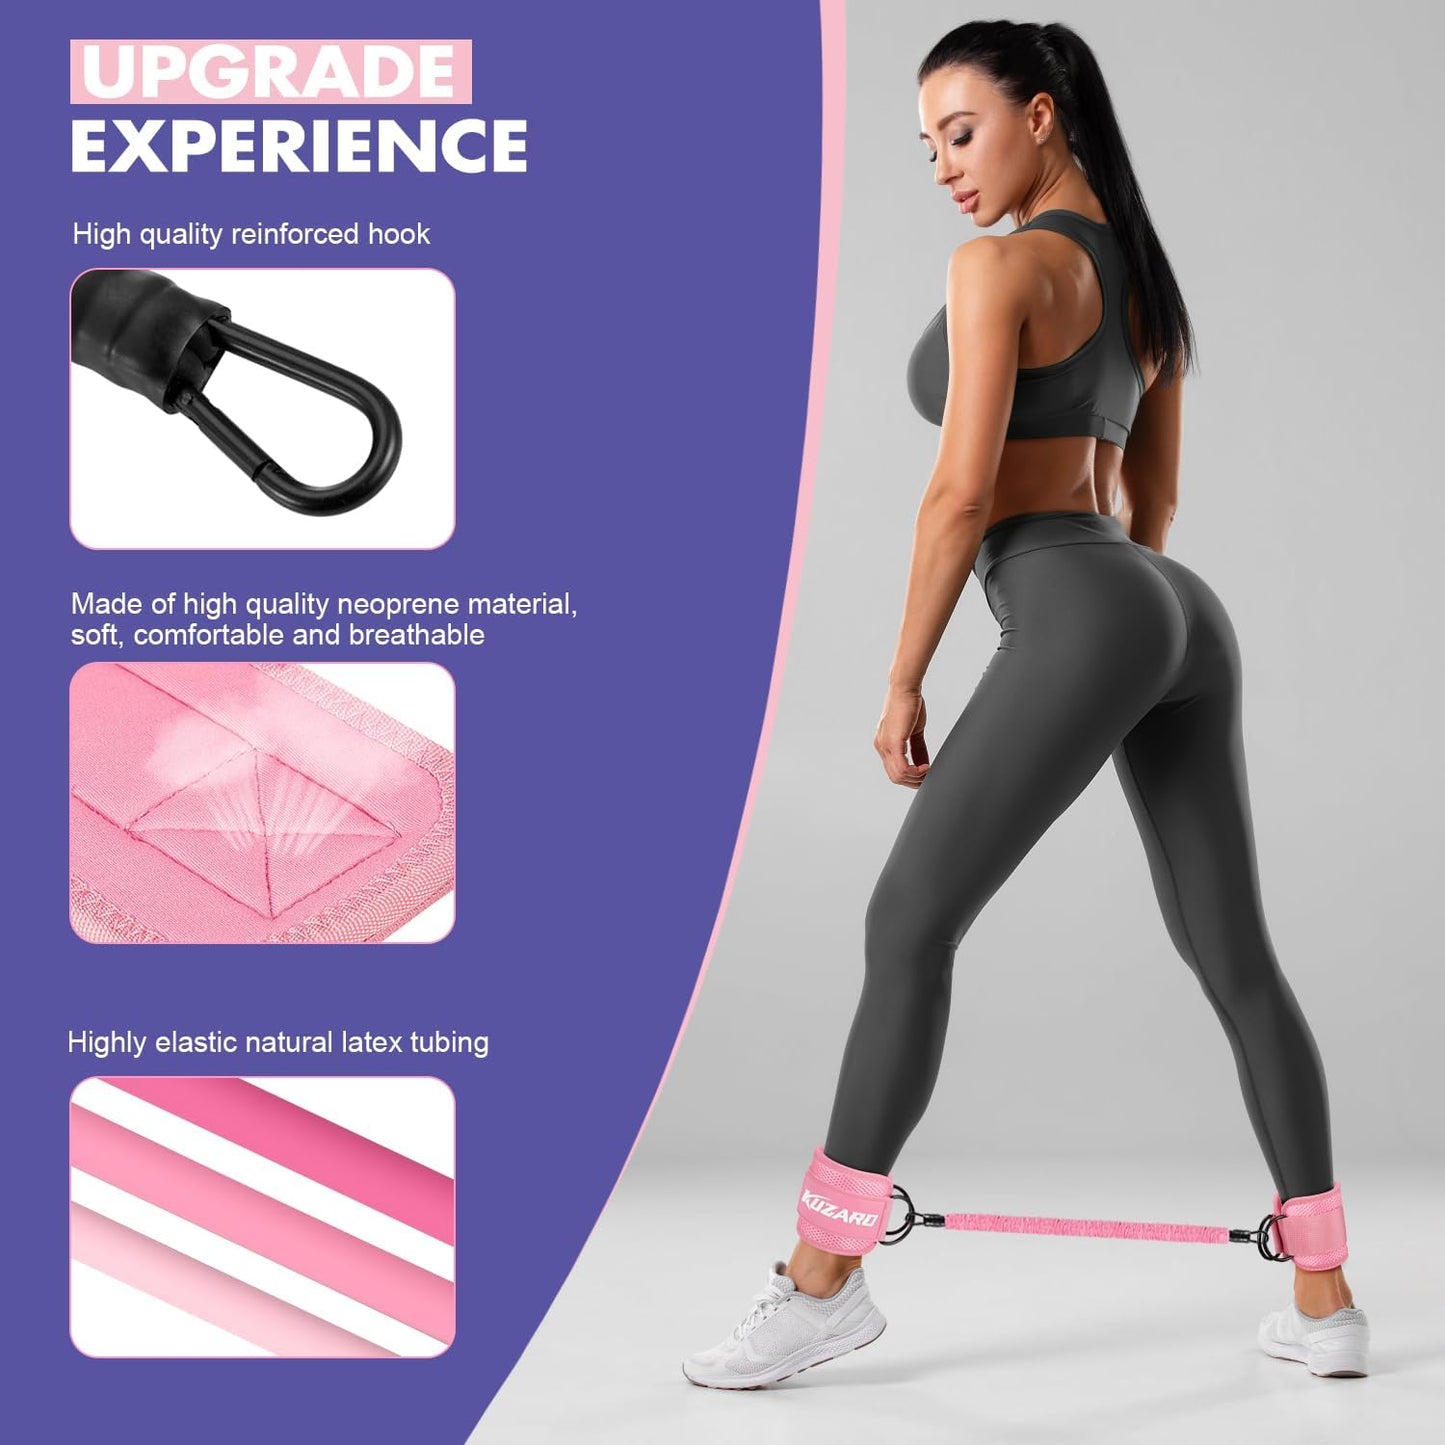 Ankle Resistance Bands with Cuffs, Ankle Bands for Working Out, Ankle Resistance Band, Glutes Workout Equipment, Butt Exercise Fitness Equipment for Women and Booty - Perfect for Home Gym Workout